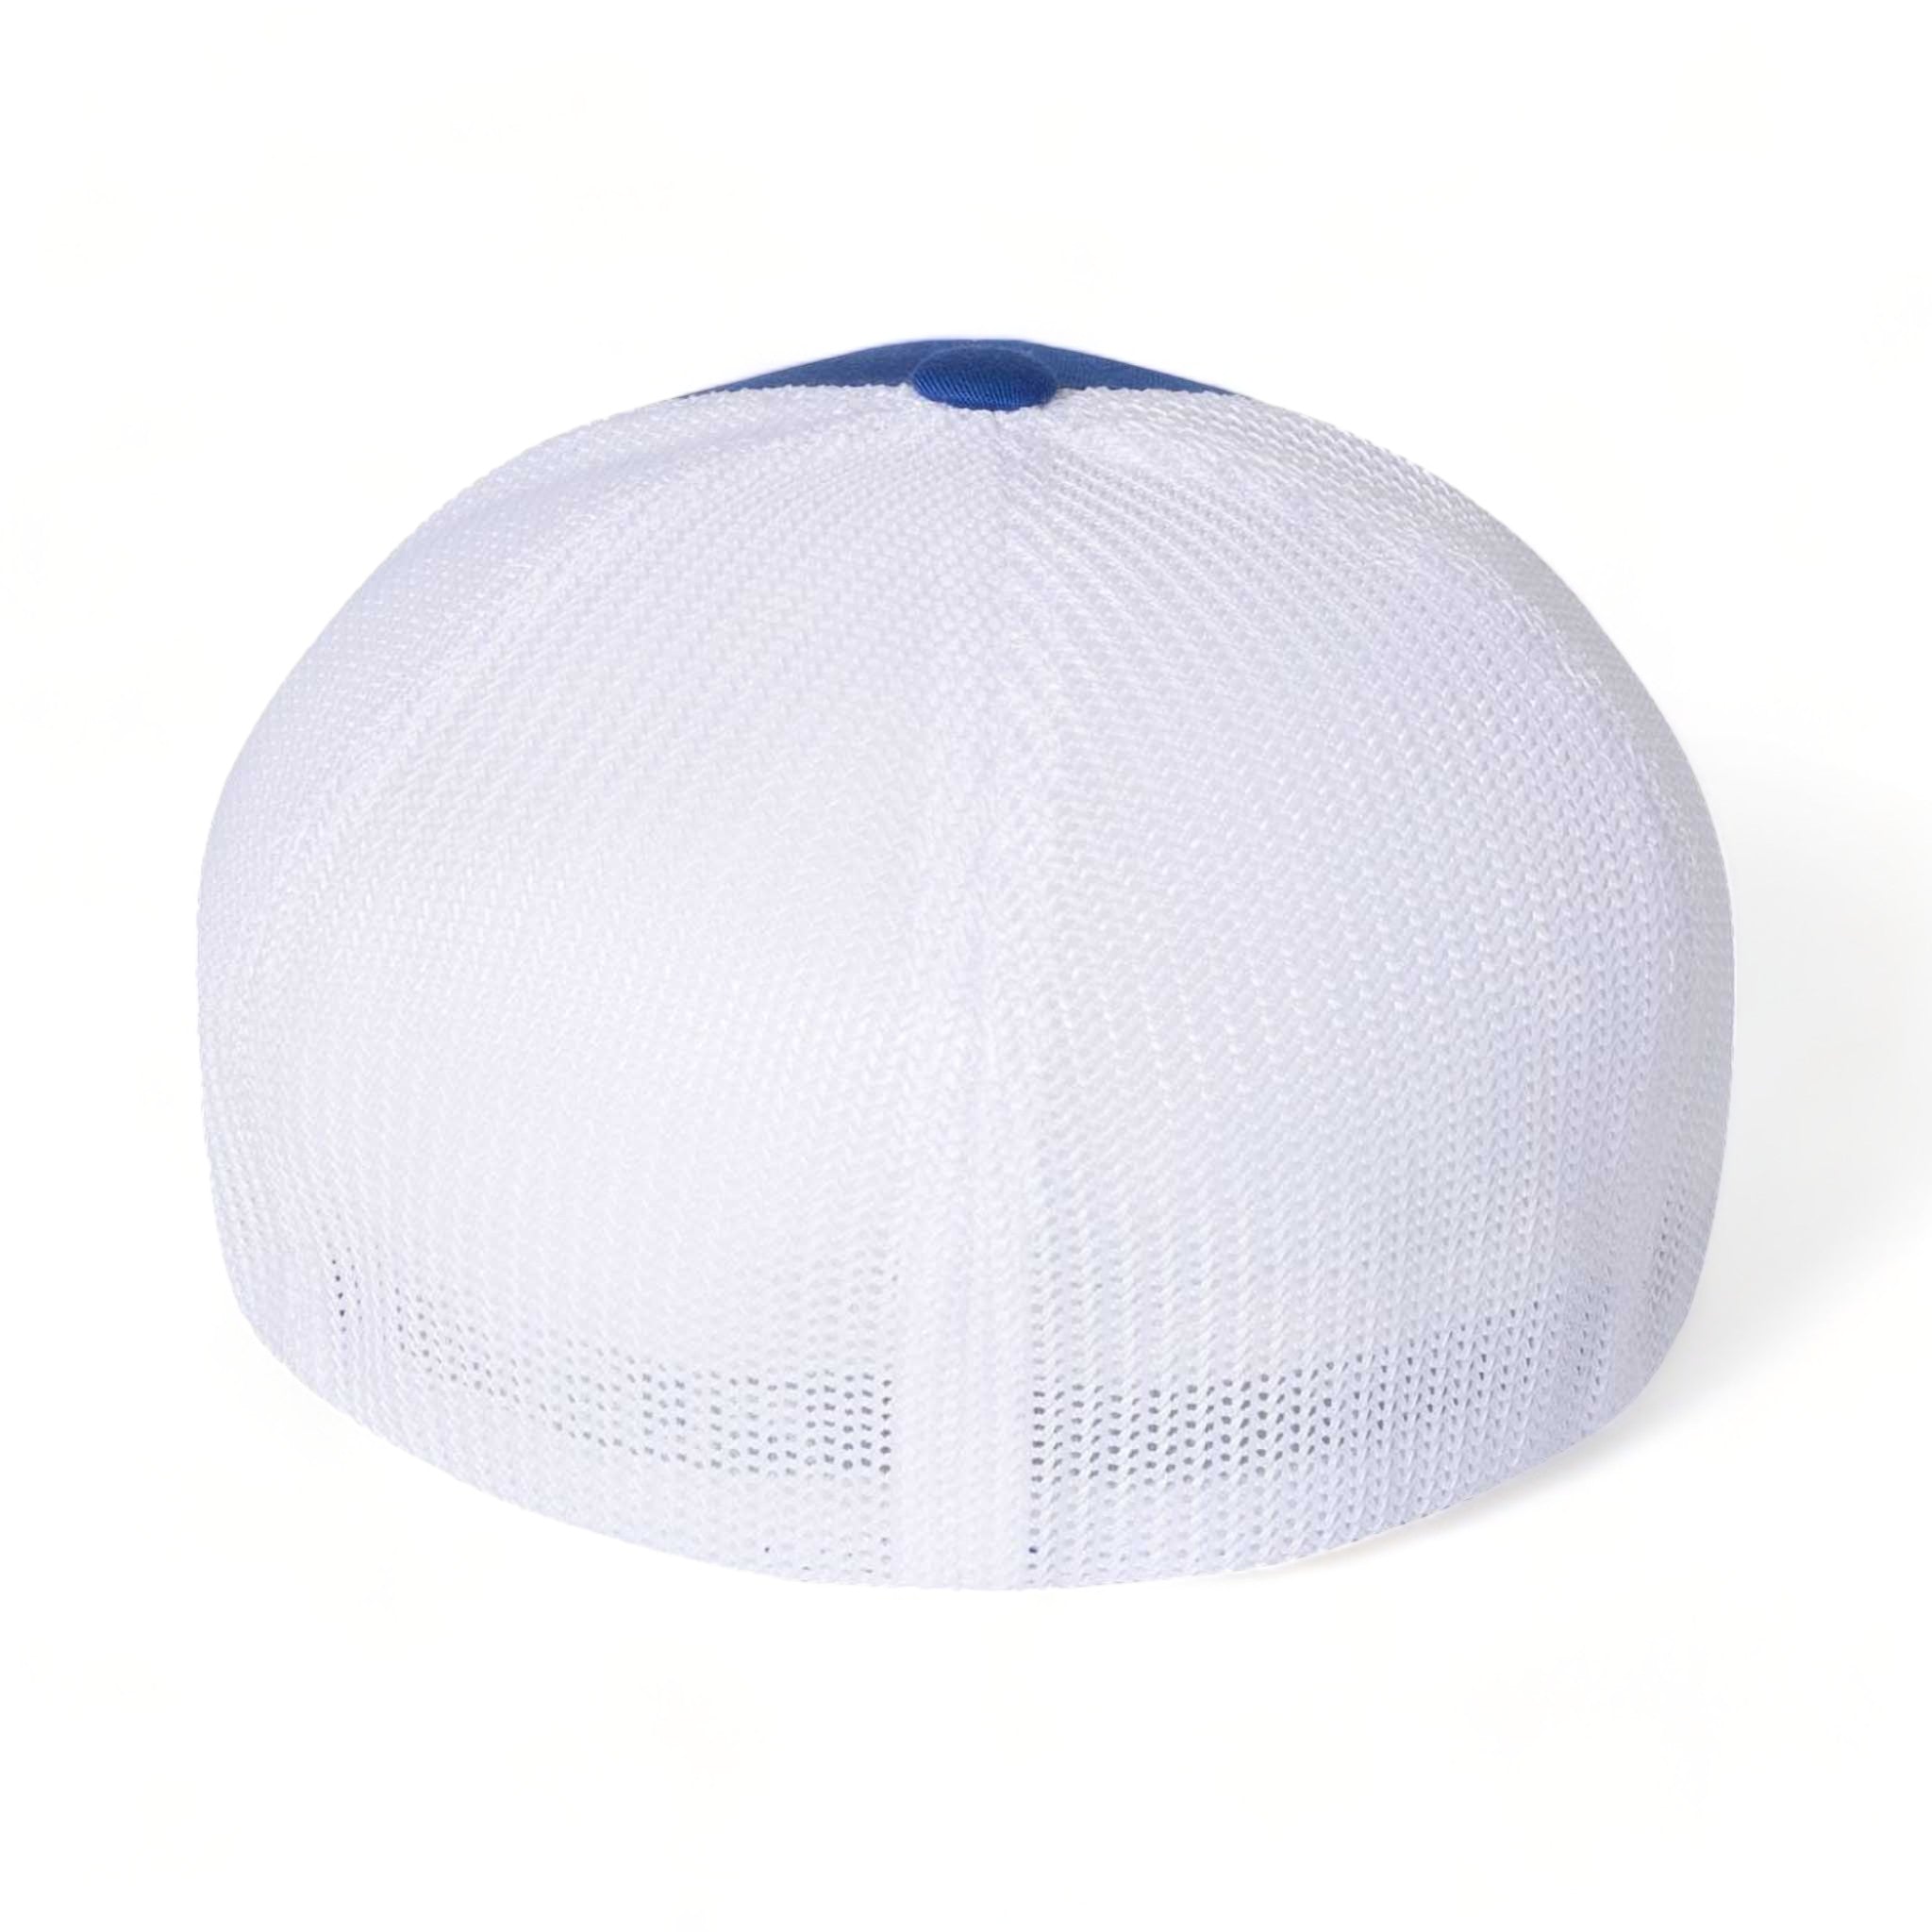 Back view of Flexfit 6511 custom hat in royal and white